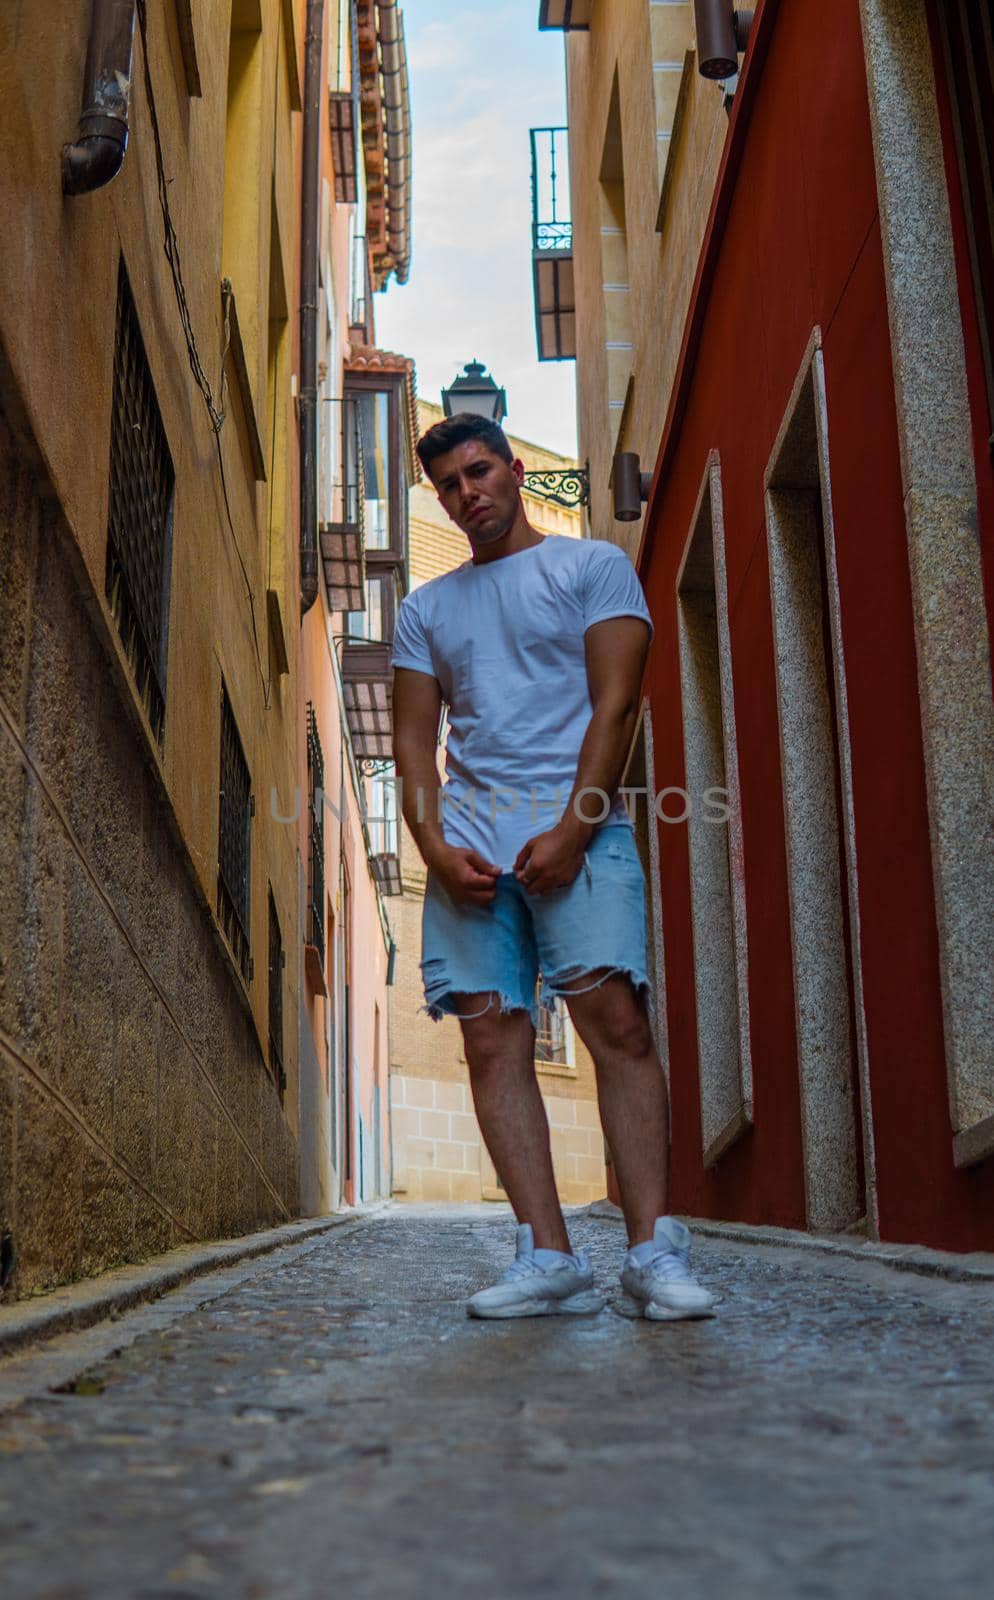 Strong guy with white T-shirt in a colorful alley